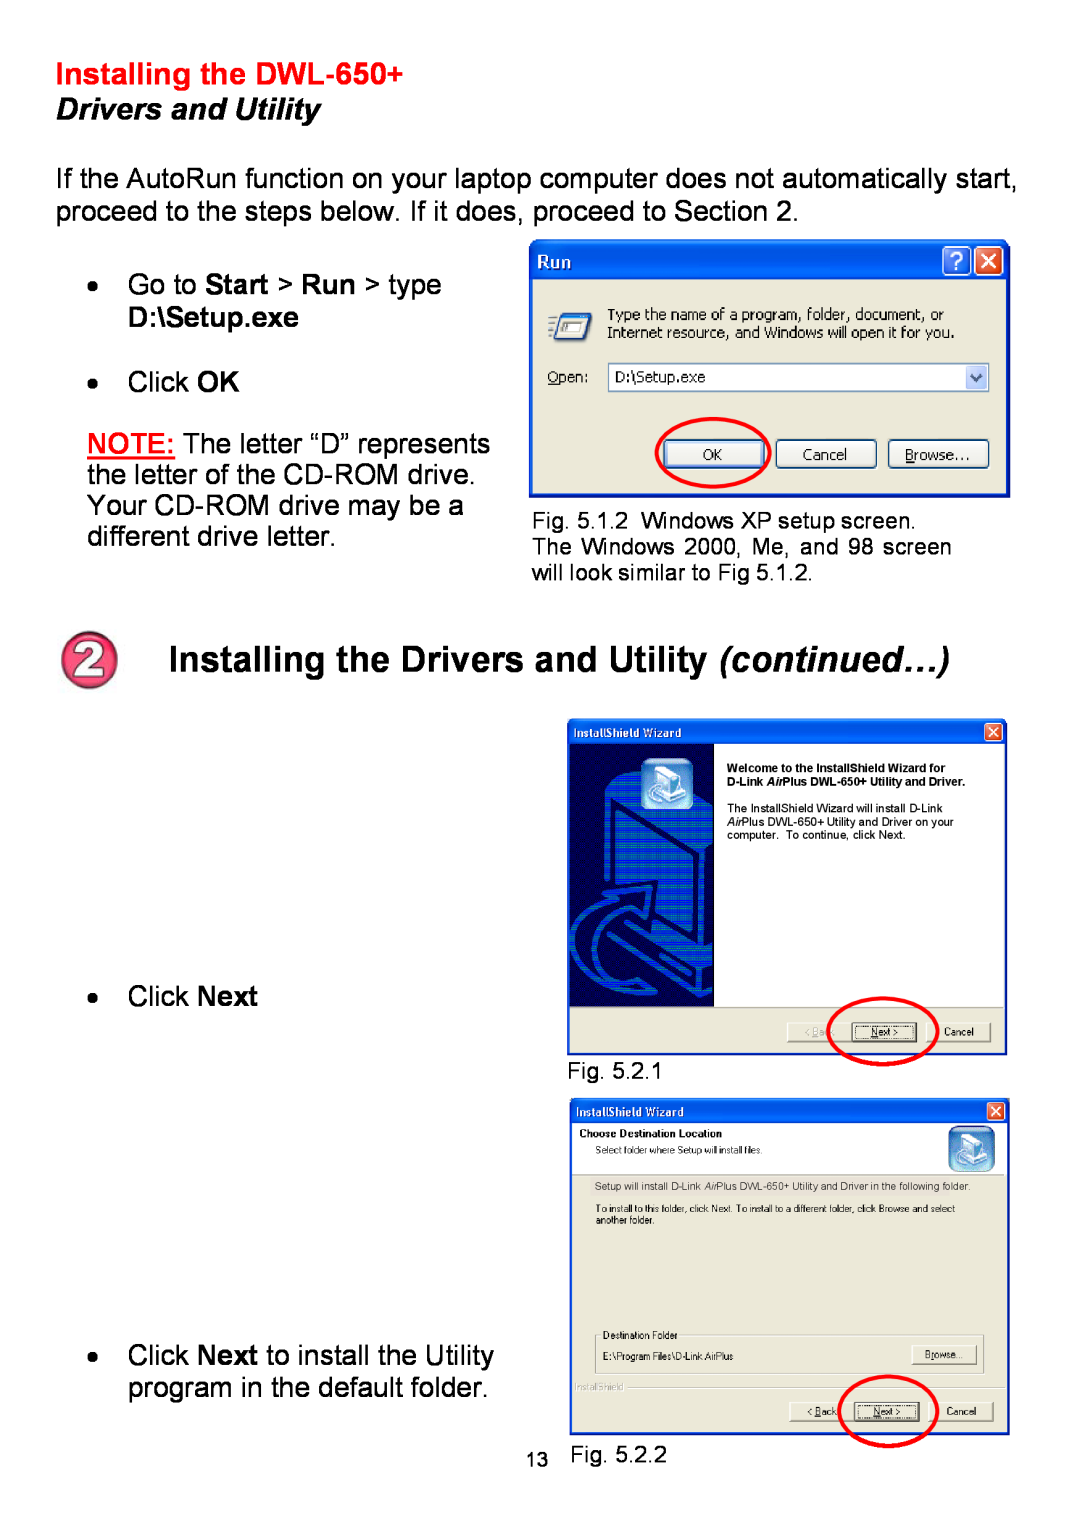 D-Link manual Installing the Drivers and Utility continued…, Installing the DWL-650+, D\Setup.exe 